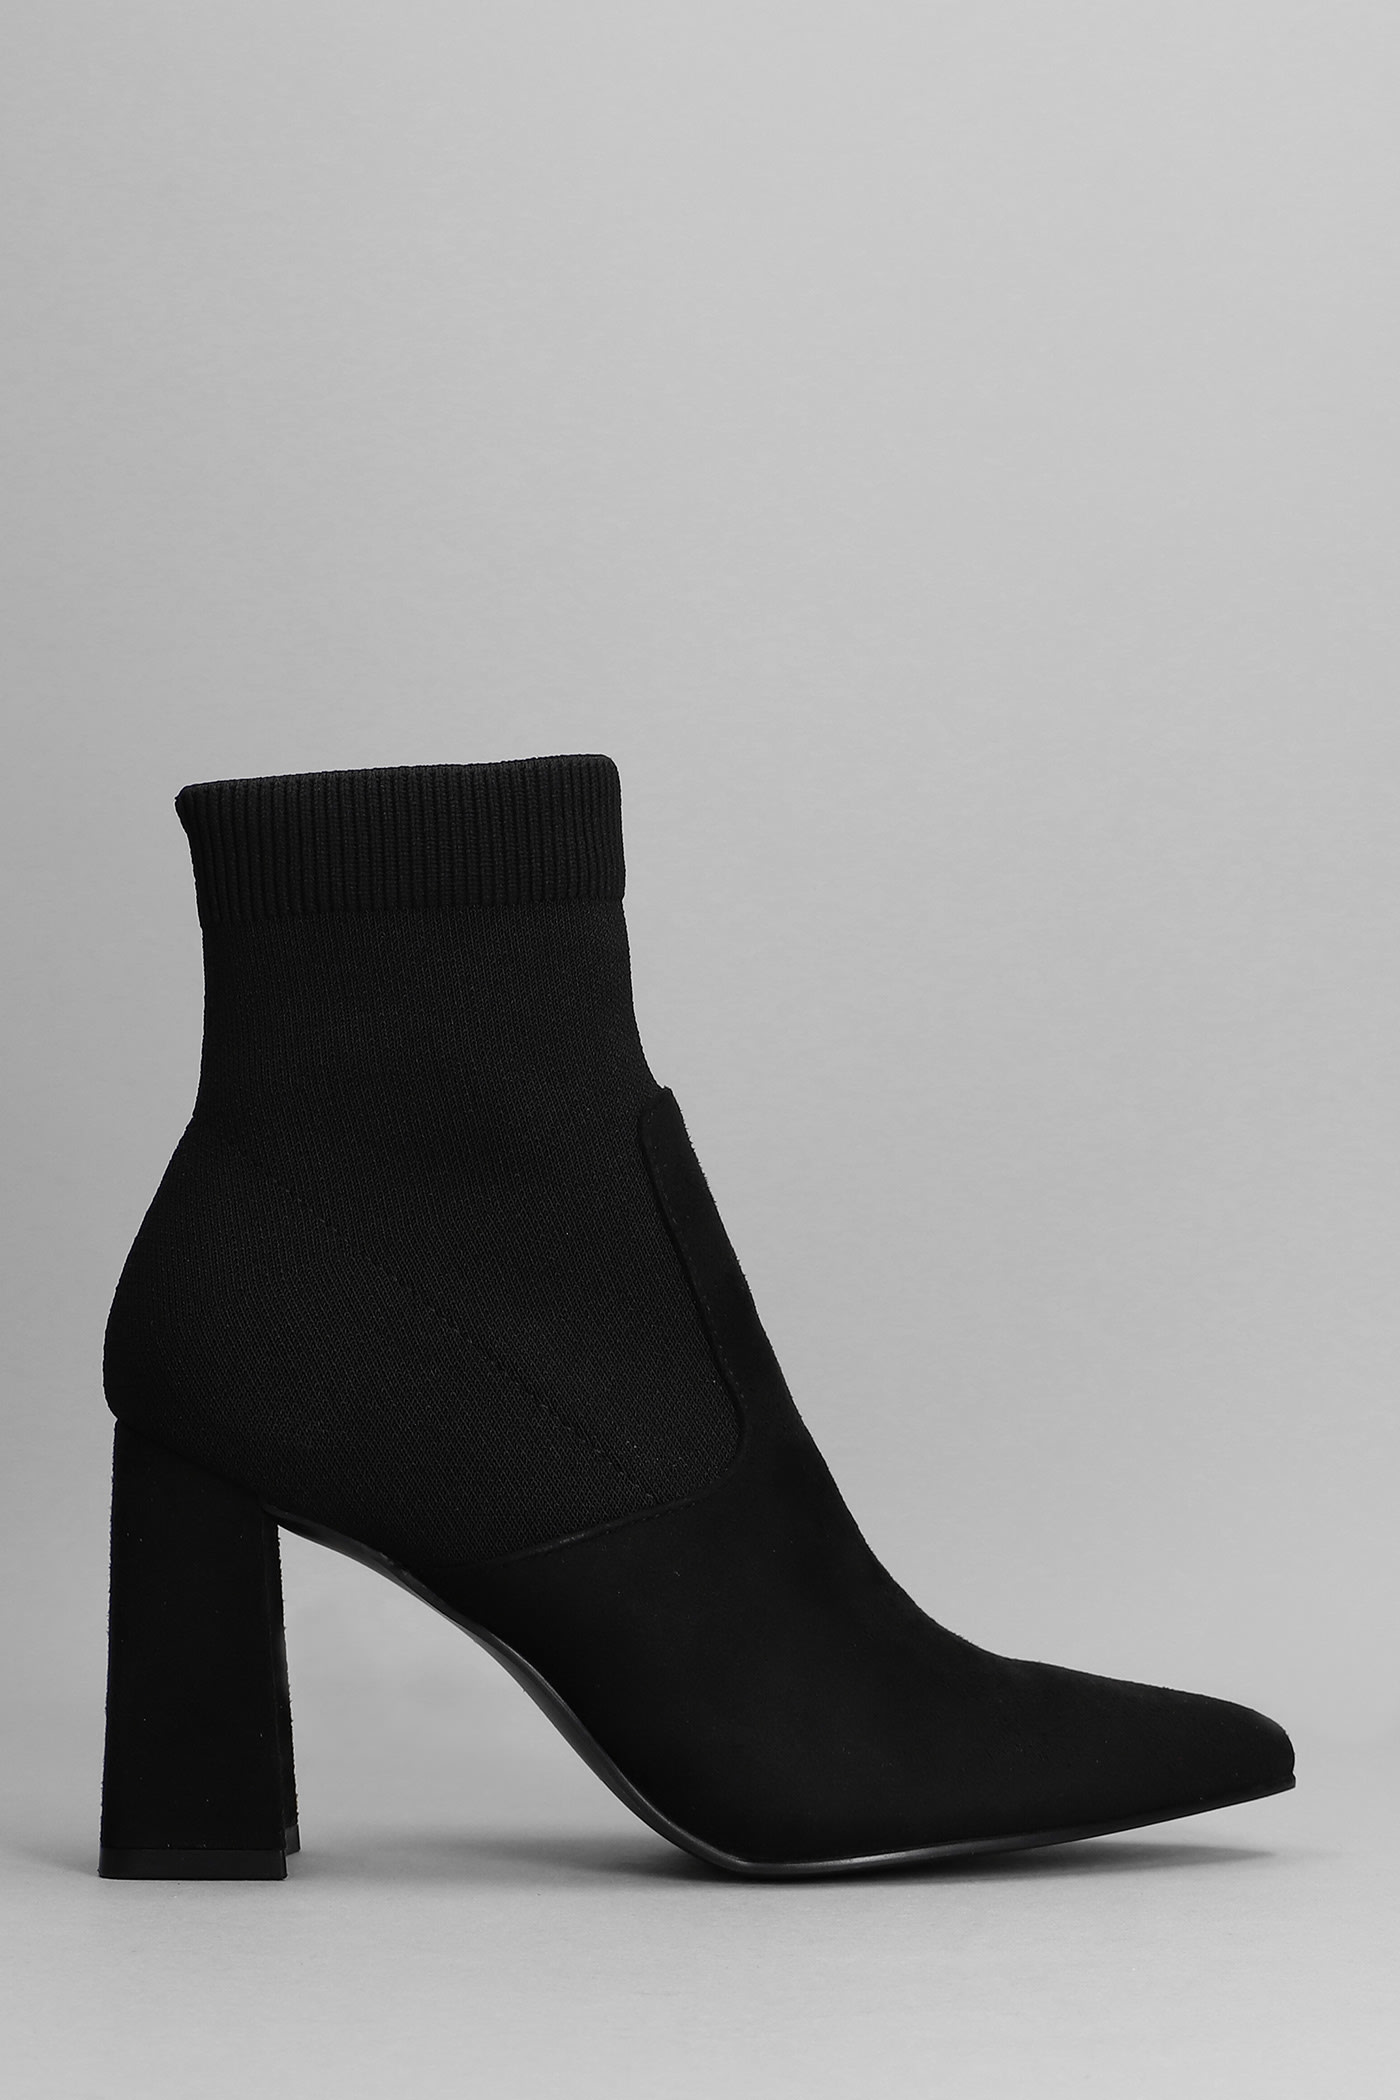 Steve Madden Ramp Up High Heels Ankle Boots In Black Suede And Fabric